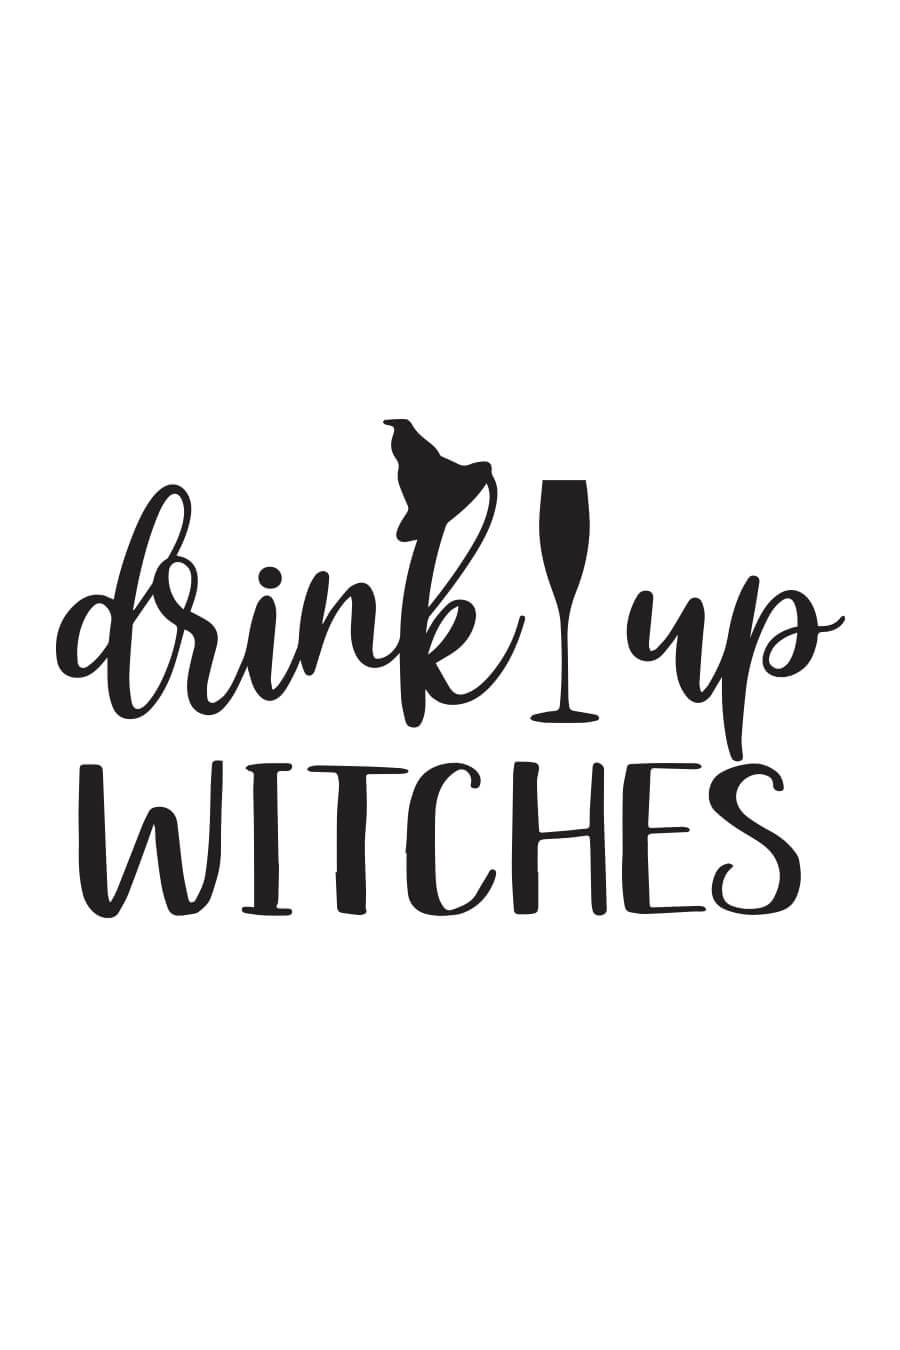 Drink Up Witches SVG Halloween dfx EPS Halloween svg Witches svg Drink Up Digital Download Witches Cut File Clipart pdf